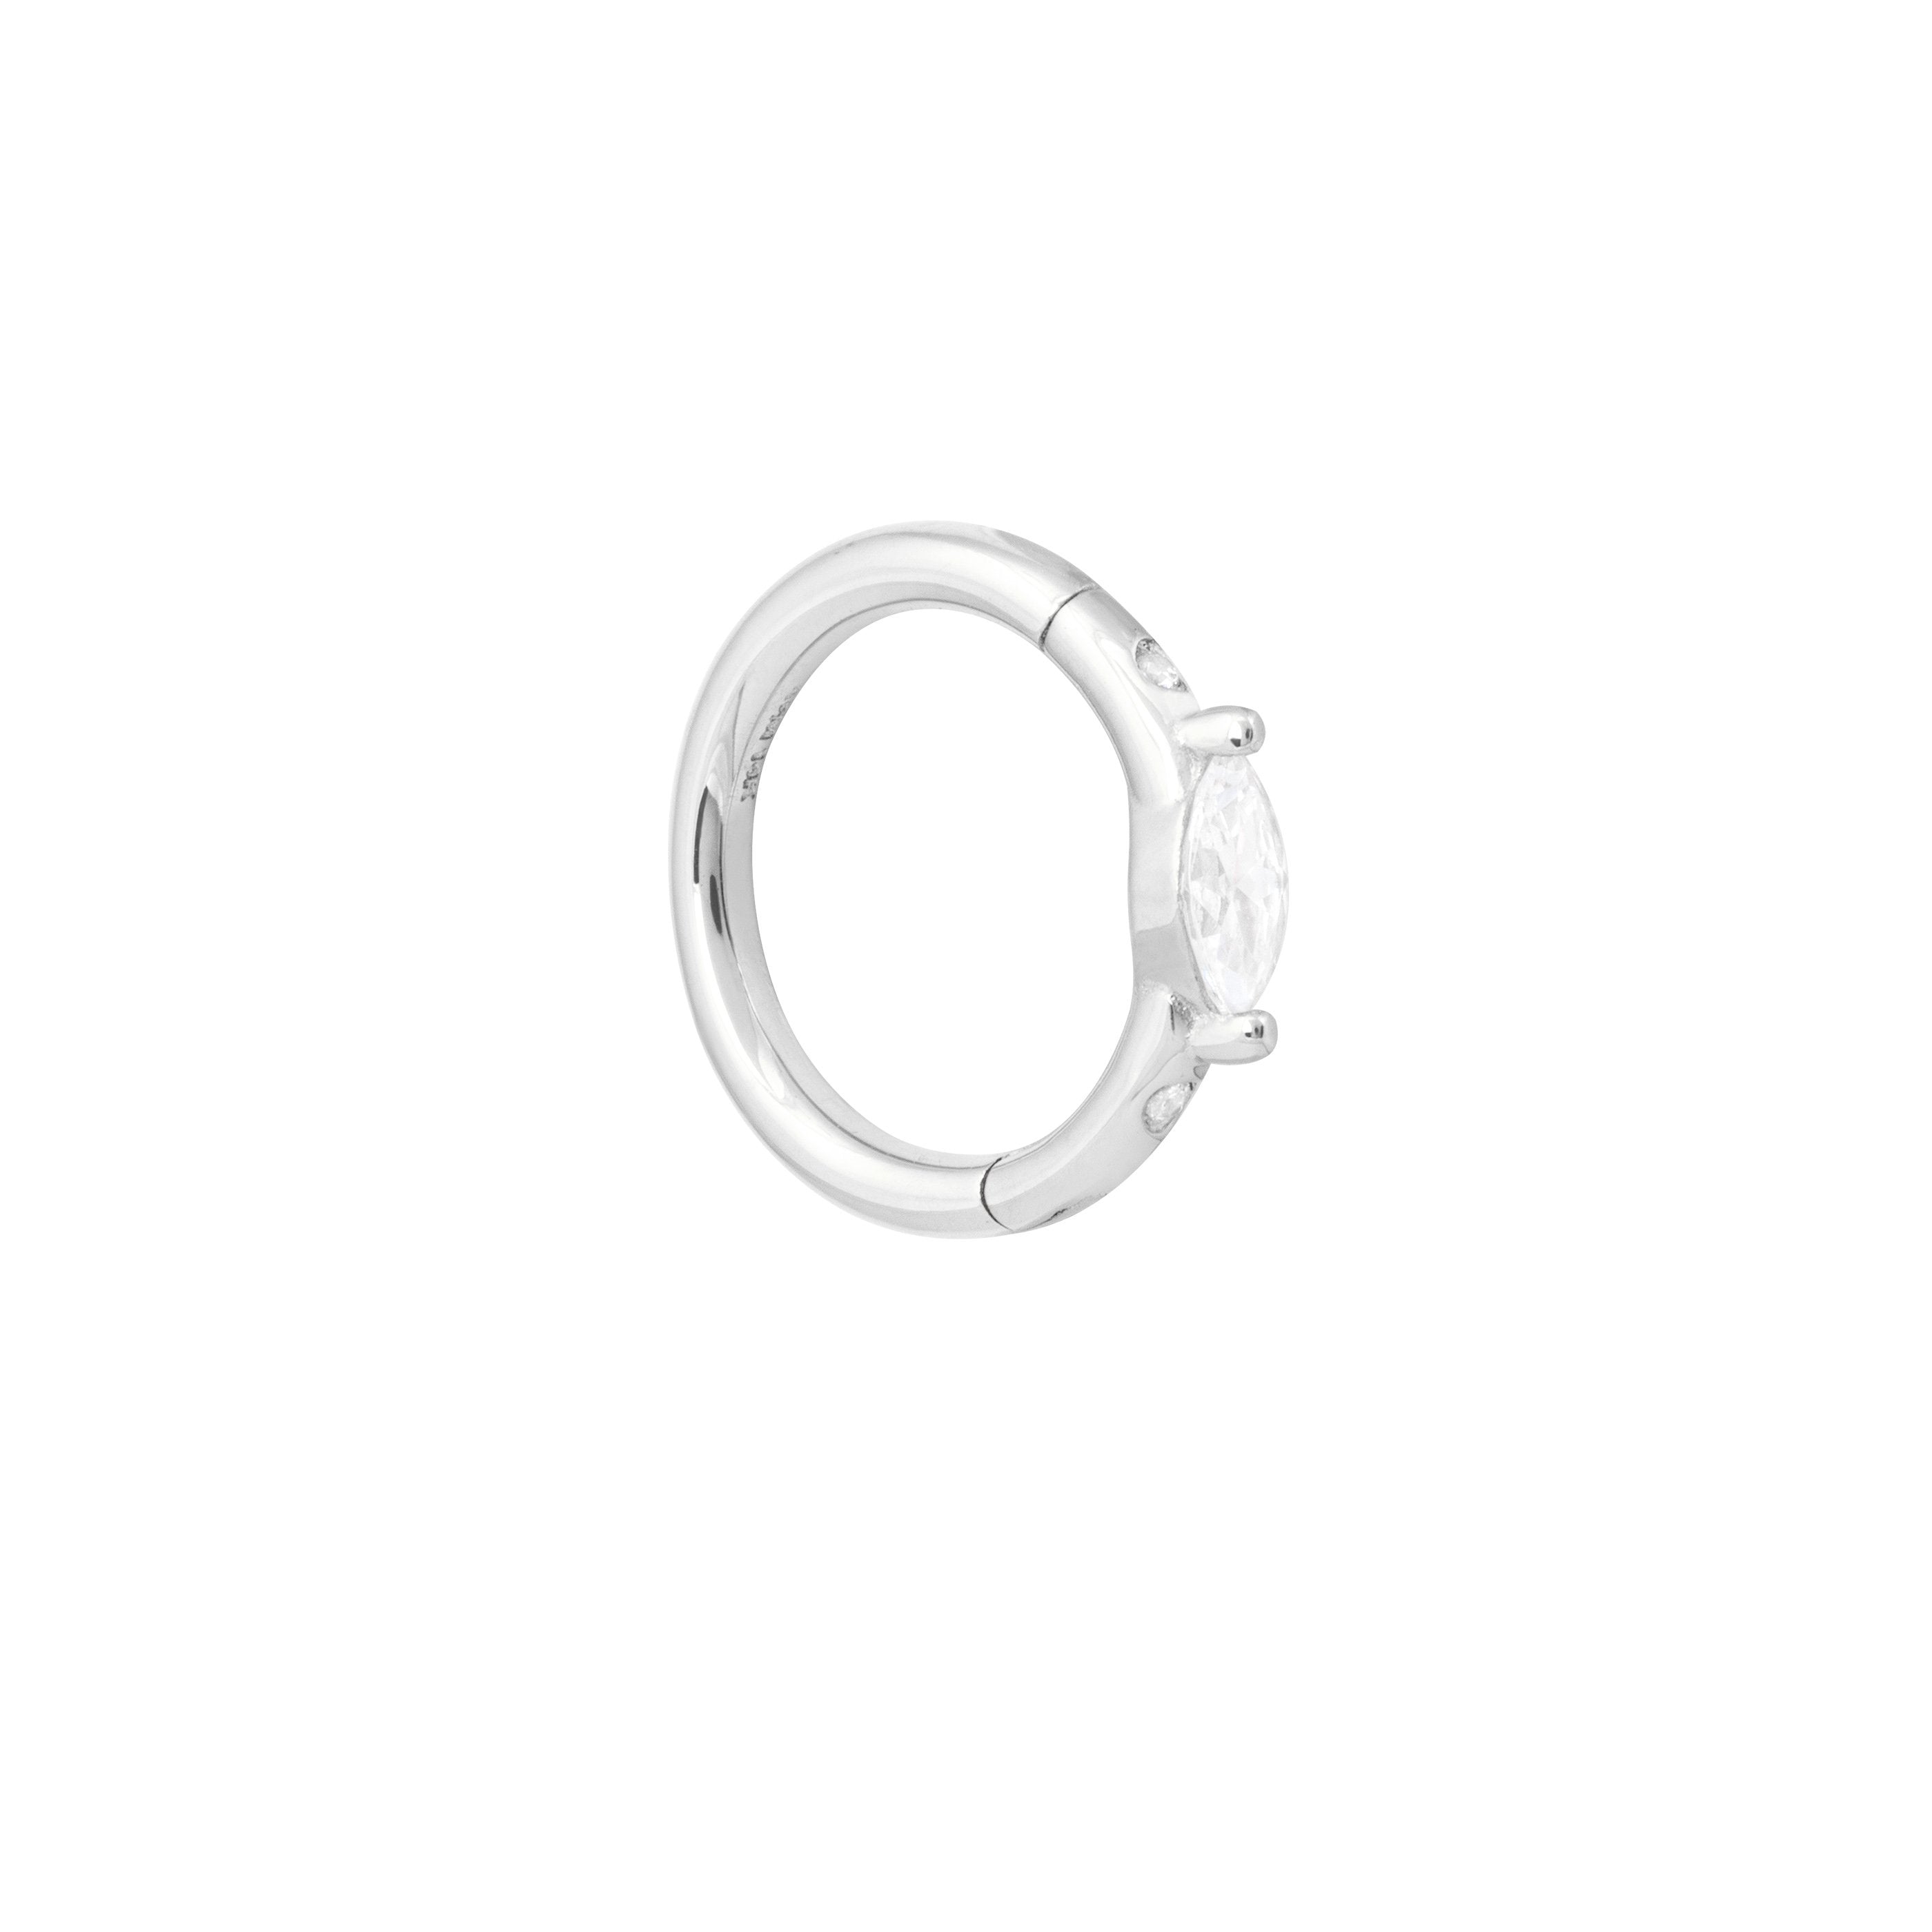 Solid White Gold Marquise Piercing Hoop